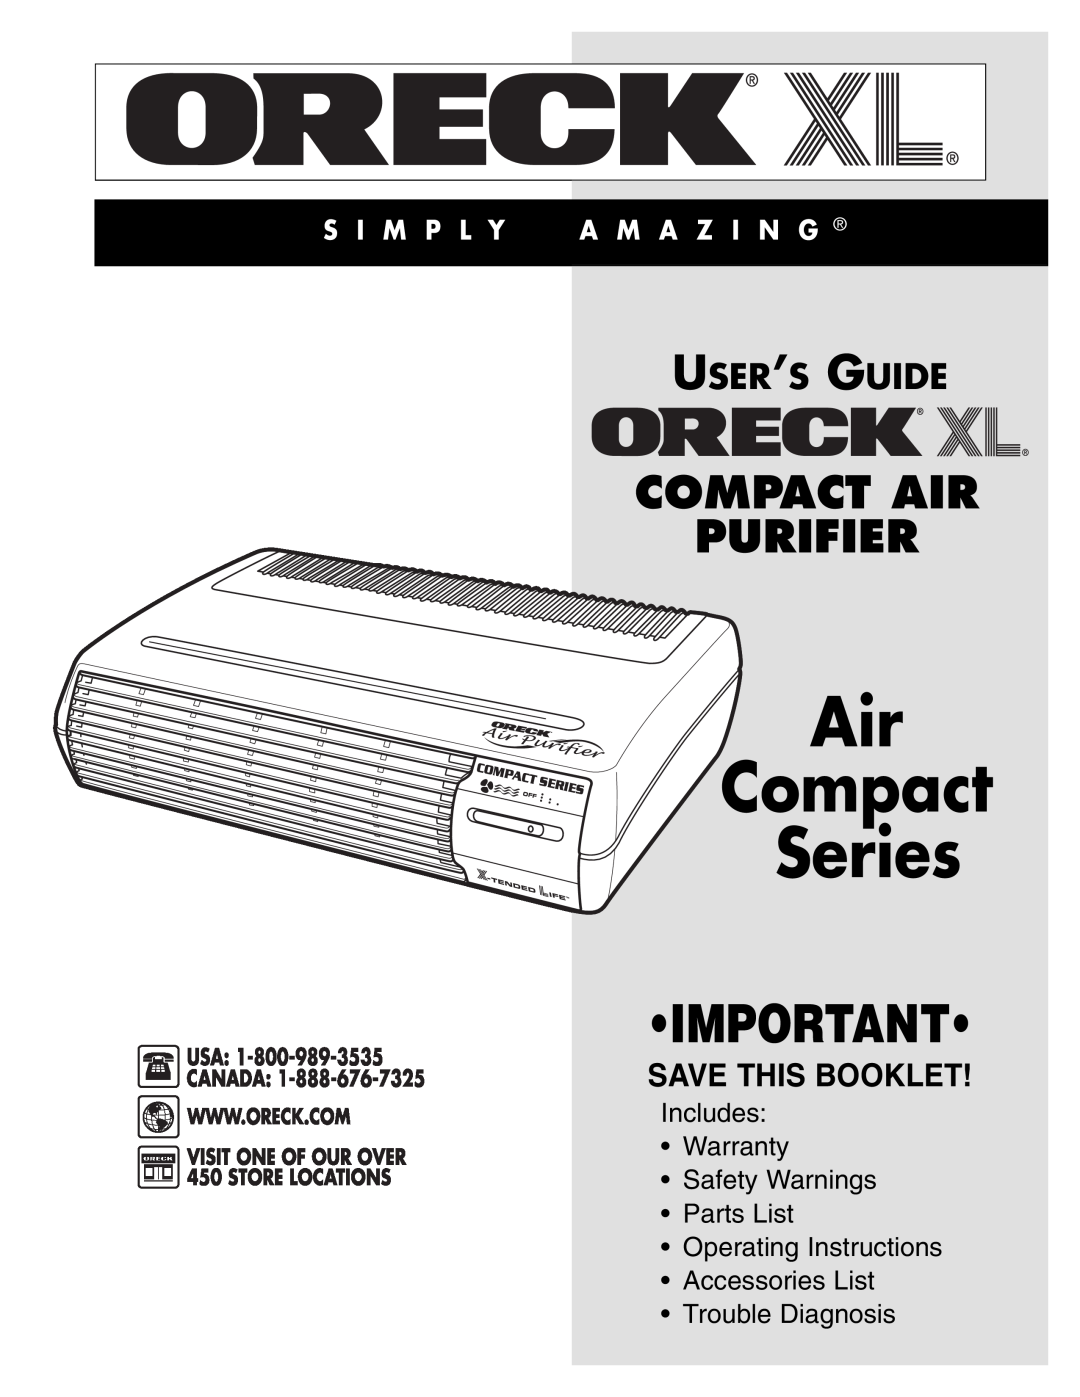 Oreck COMPACT AIR PURIFIER warranty Air Compact Series, Compact Air Purifier, User’S Guide, Save This Booklet 